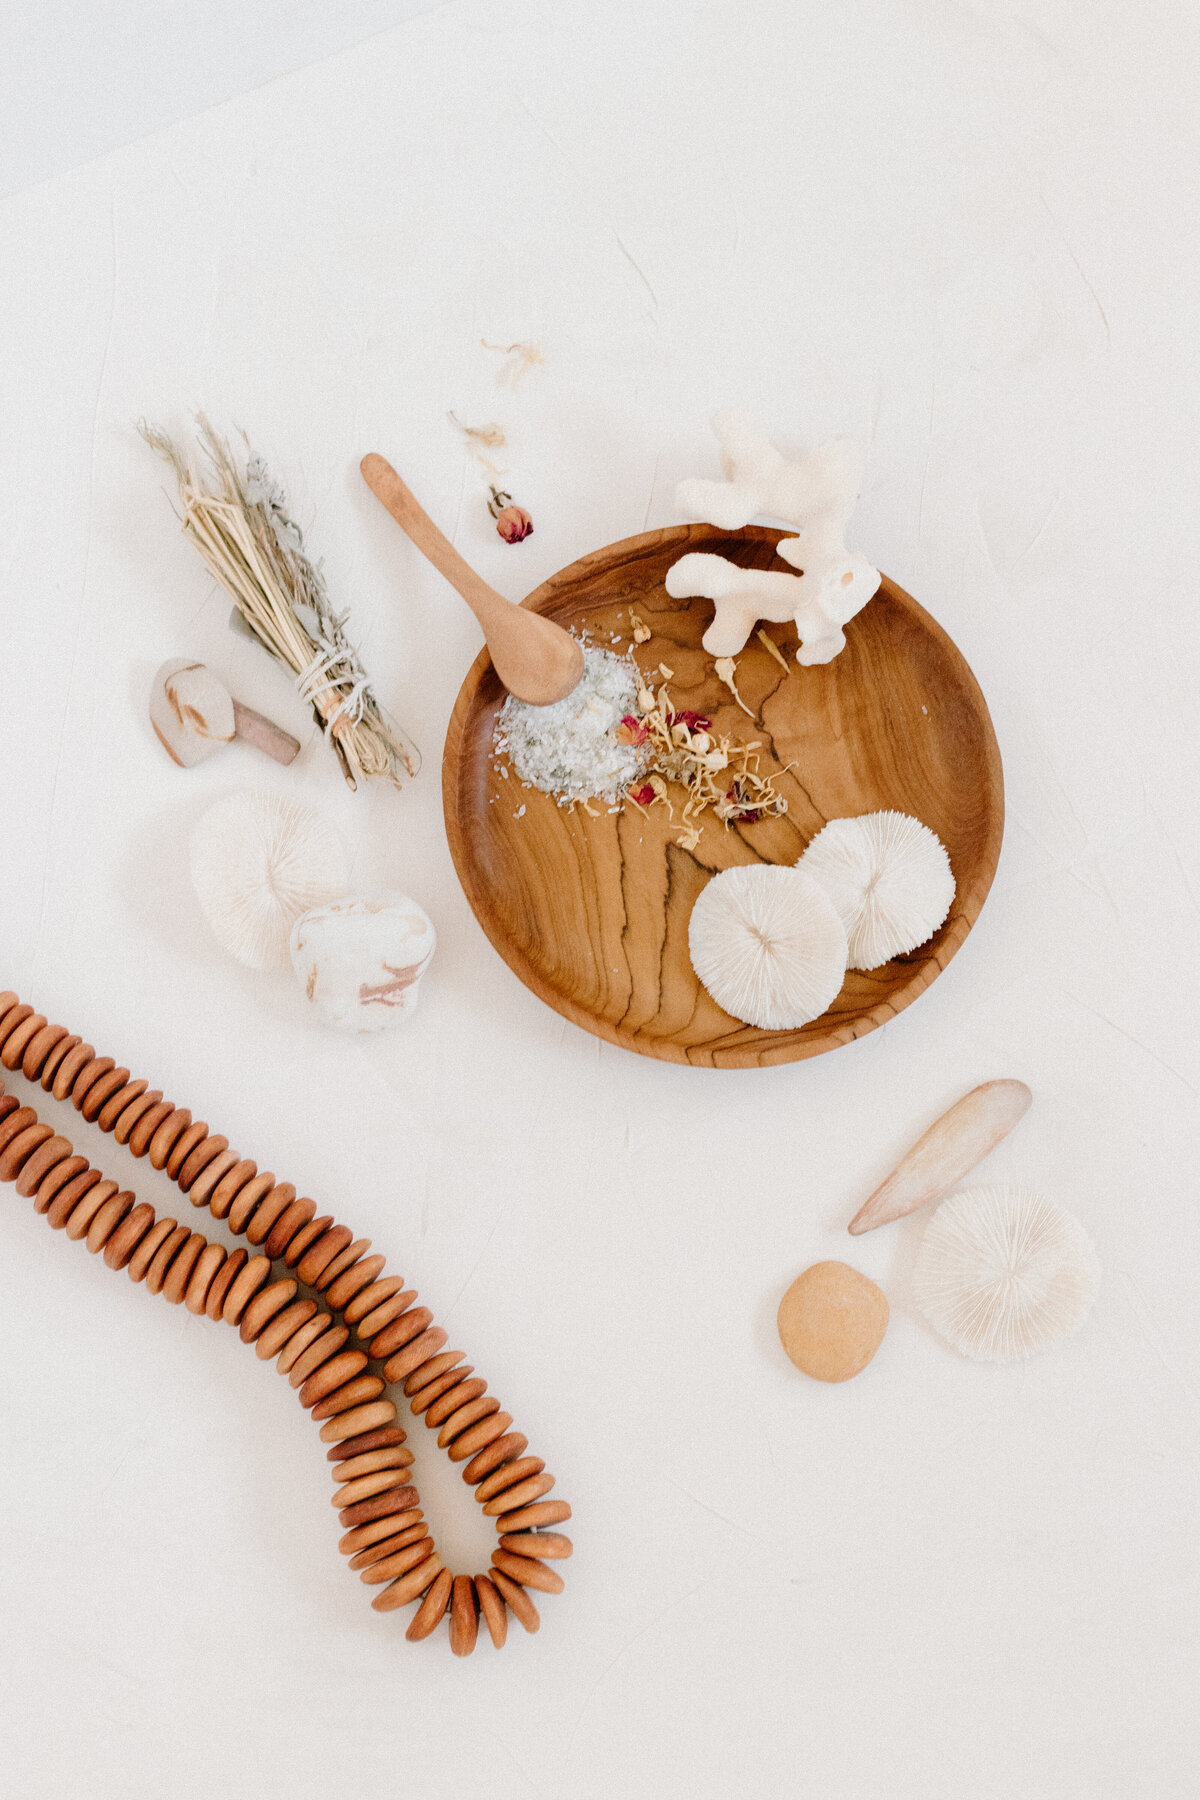 bath salts shells and disc beads on wooden trays